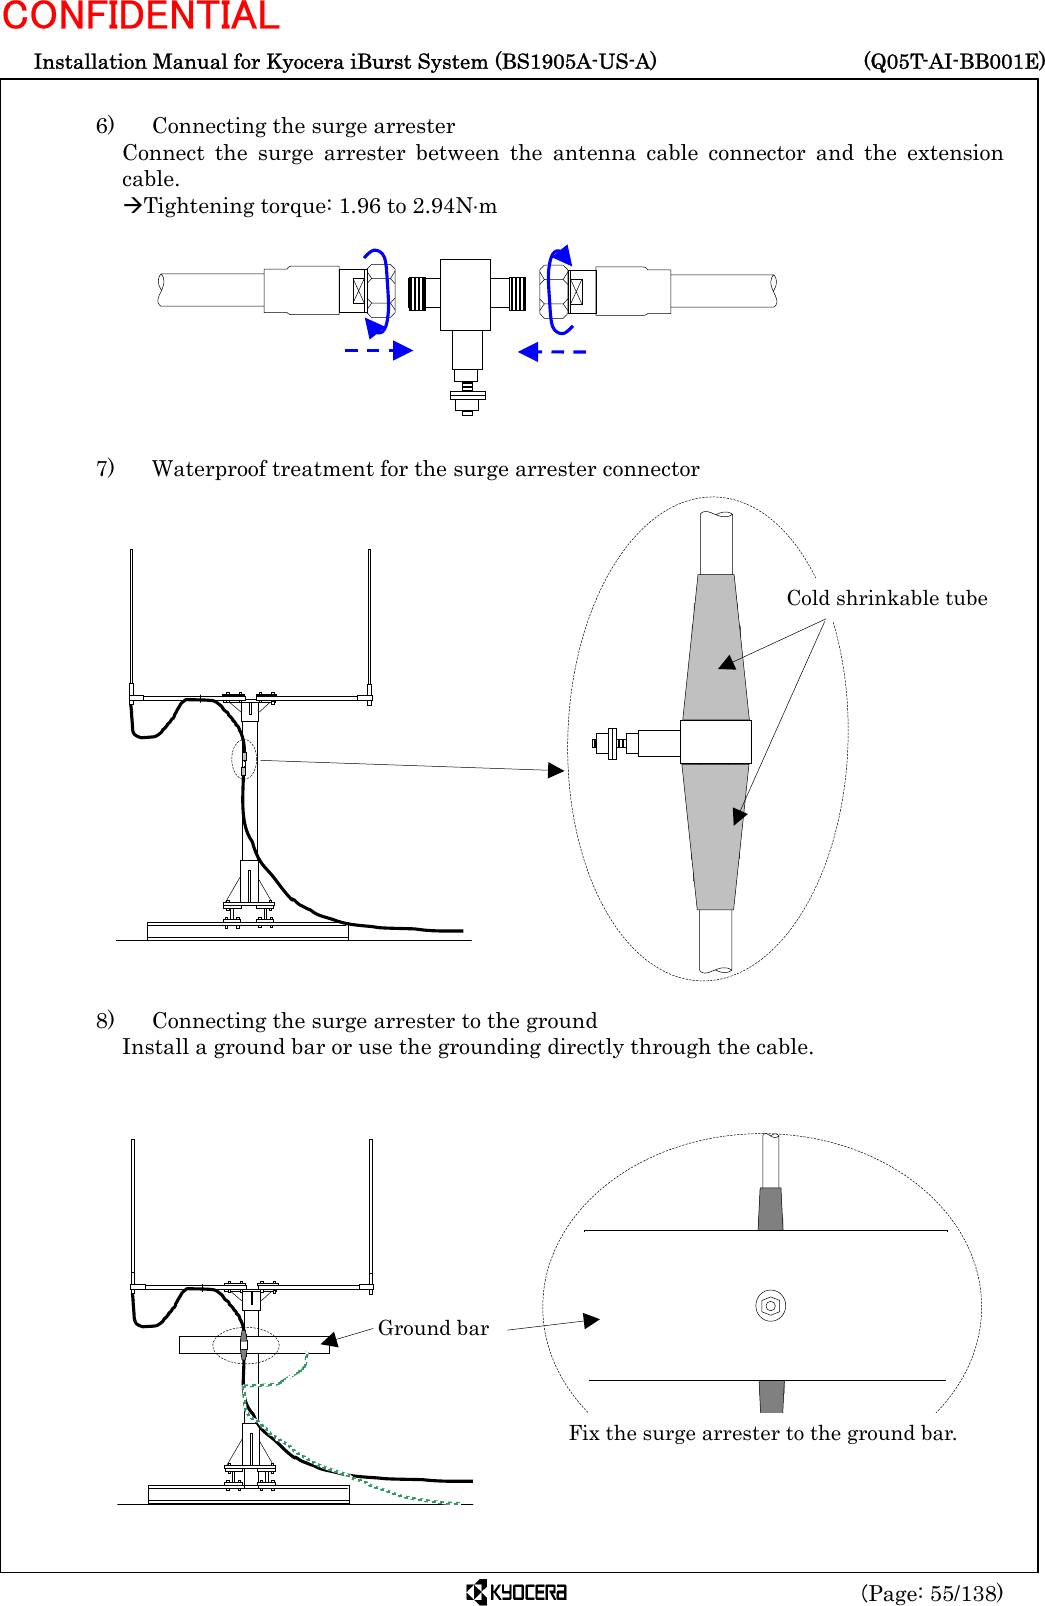  Installation Manual for Kyocera iBurst System (BS1905A-US-A)     (Q05T-AI-BB001E) (Page: 55/138) CONFIDENTIAL  6)    Connecting the surge arrester Connect the surge arrester between the antenna cable connector and the extension cable. ÆTightening torque: 1.96 to 2.94N⋅m          7)   Waterproof treatment for the surge arrester connector                      8)    Connecting the surge arrester to the ground Install a ground bar or use the grounding directly through the cable.                   Ground bar Fix the surge arrester to the ground bar.Cold shrinkable tube 